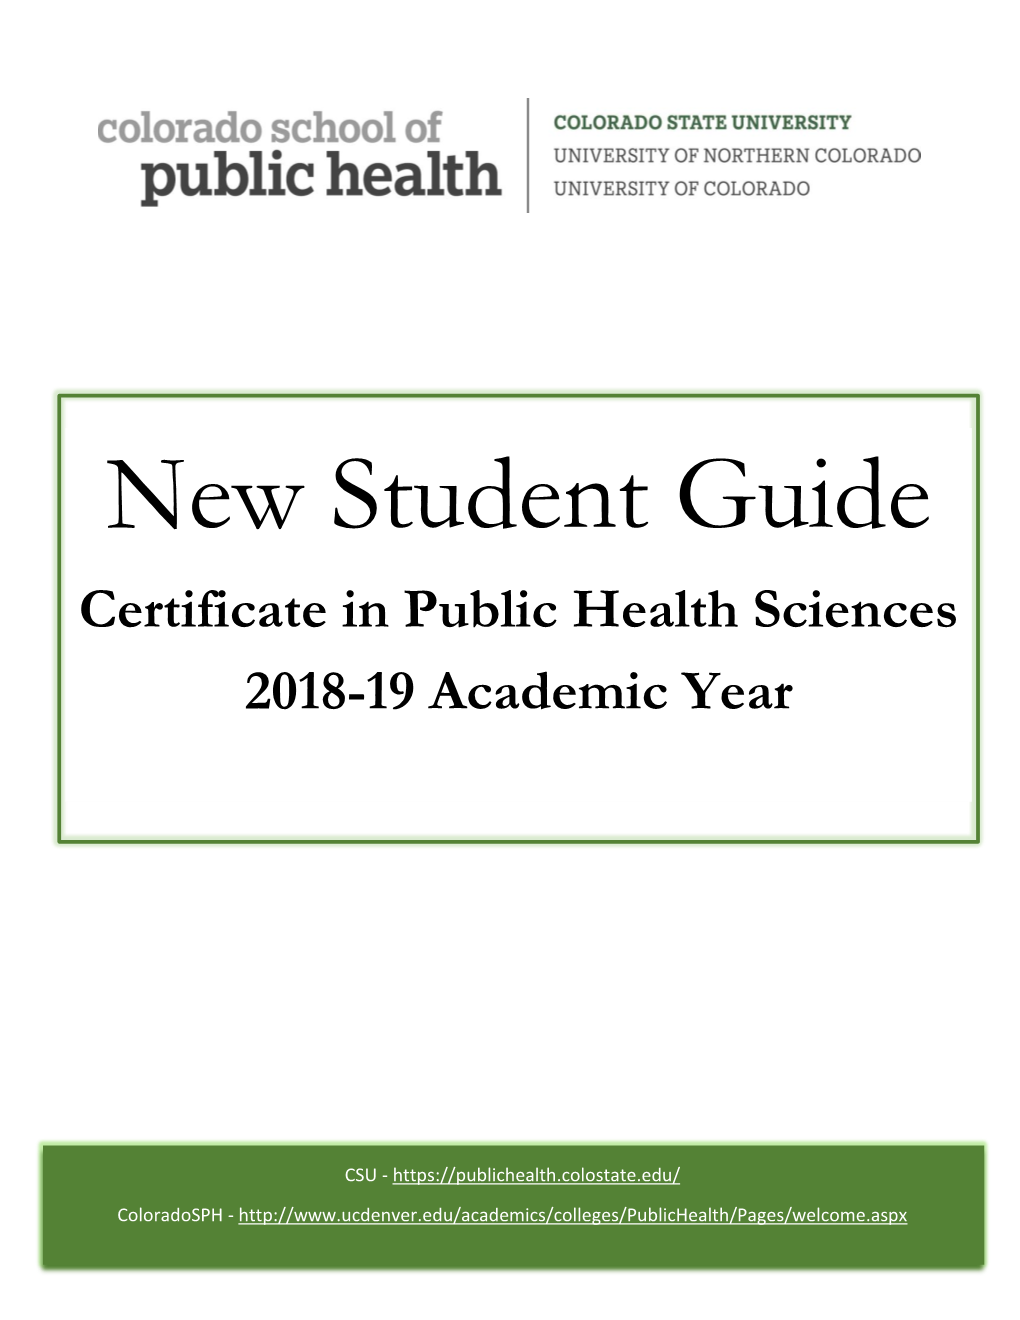 Certificate in Public Health Sciences New Student Guide